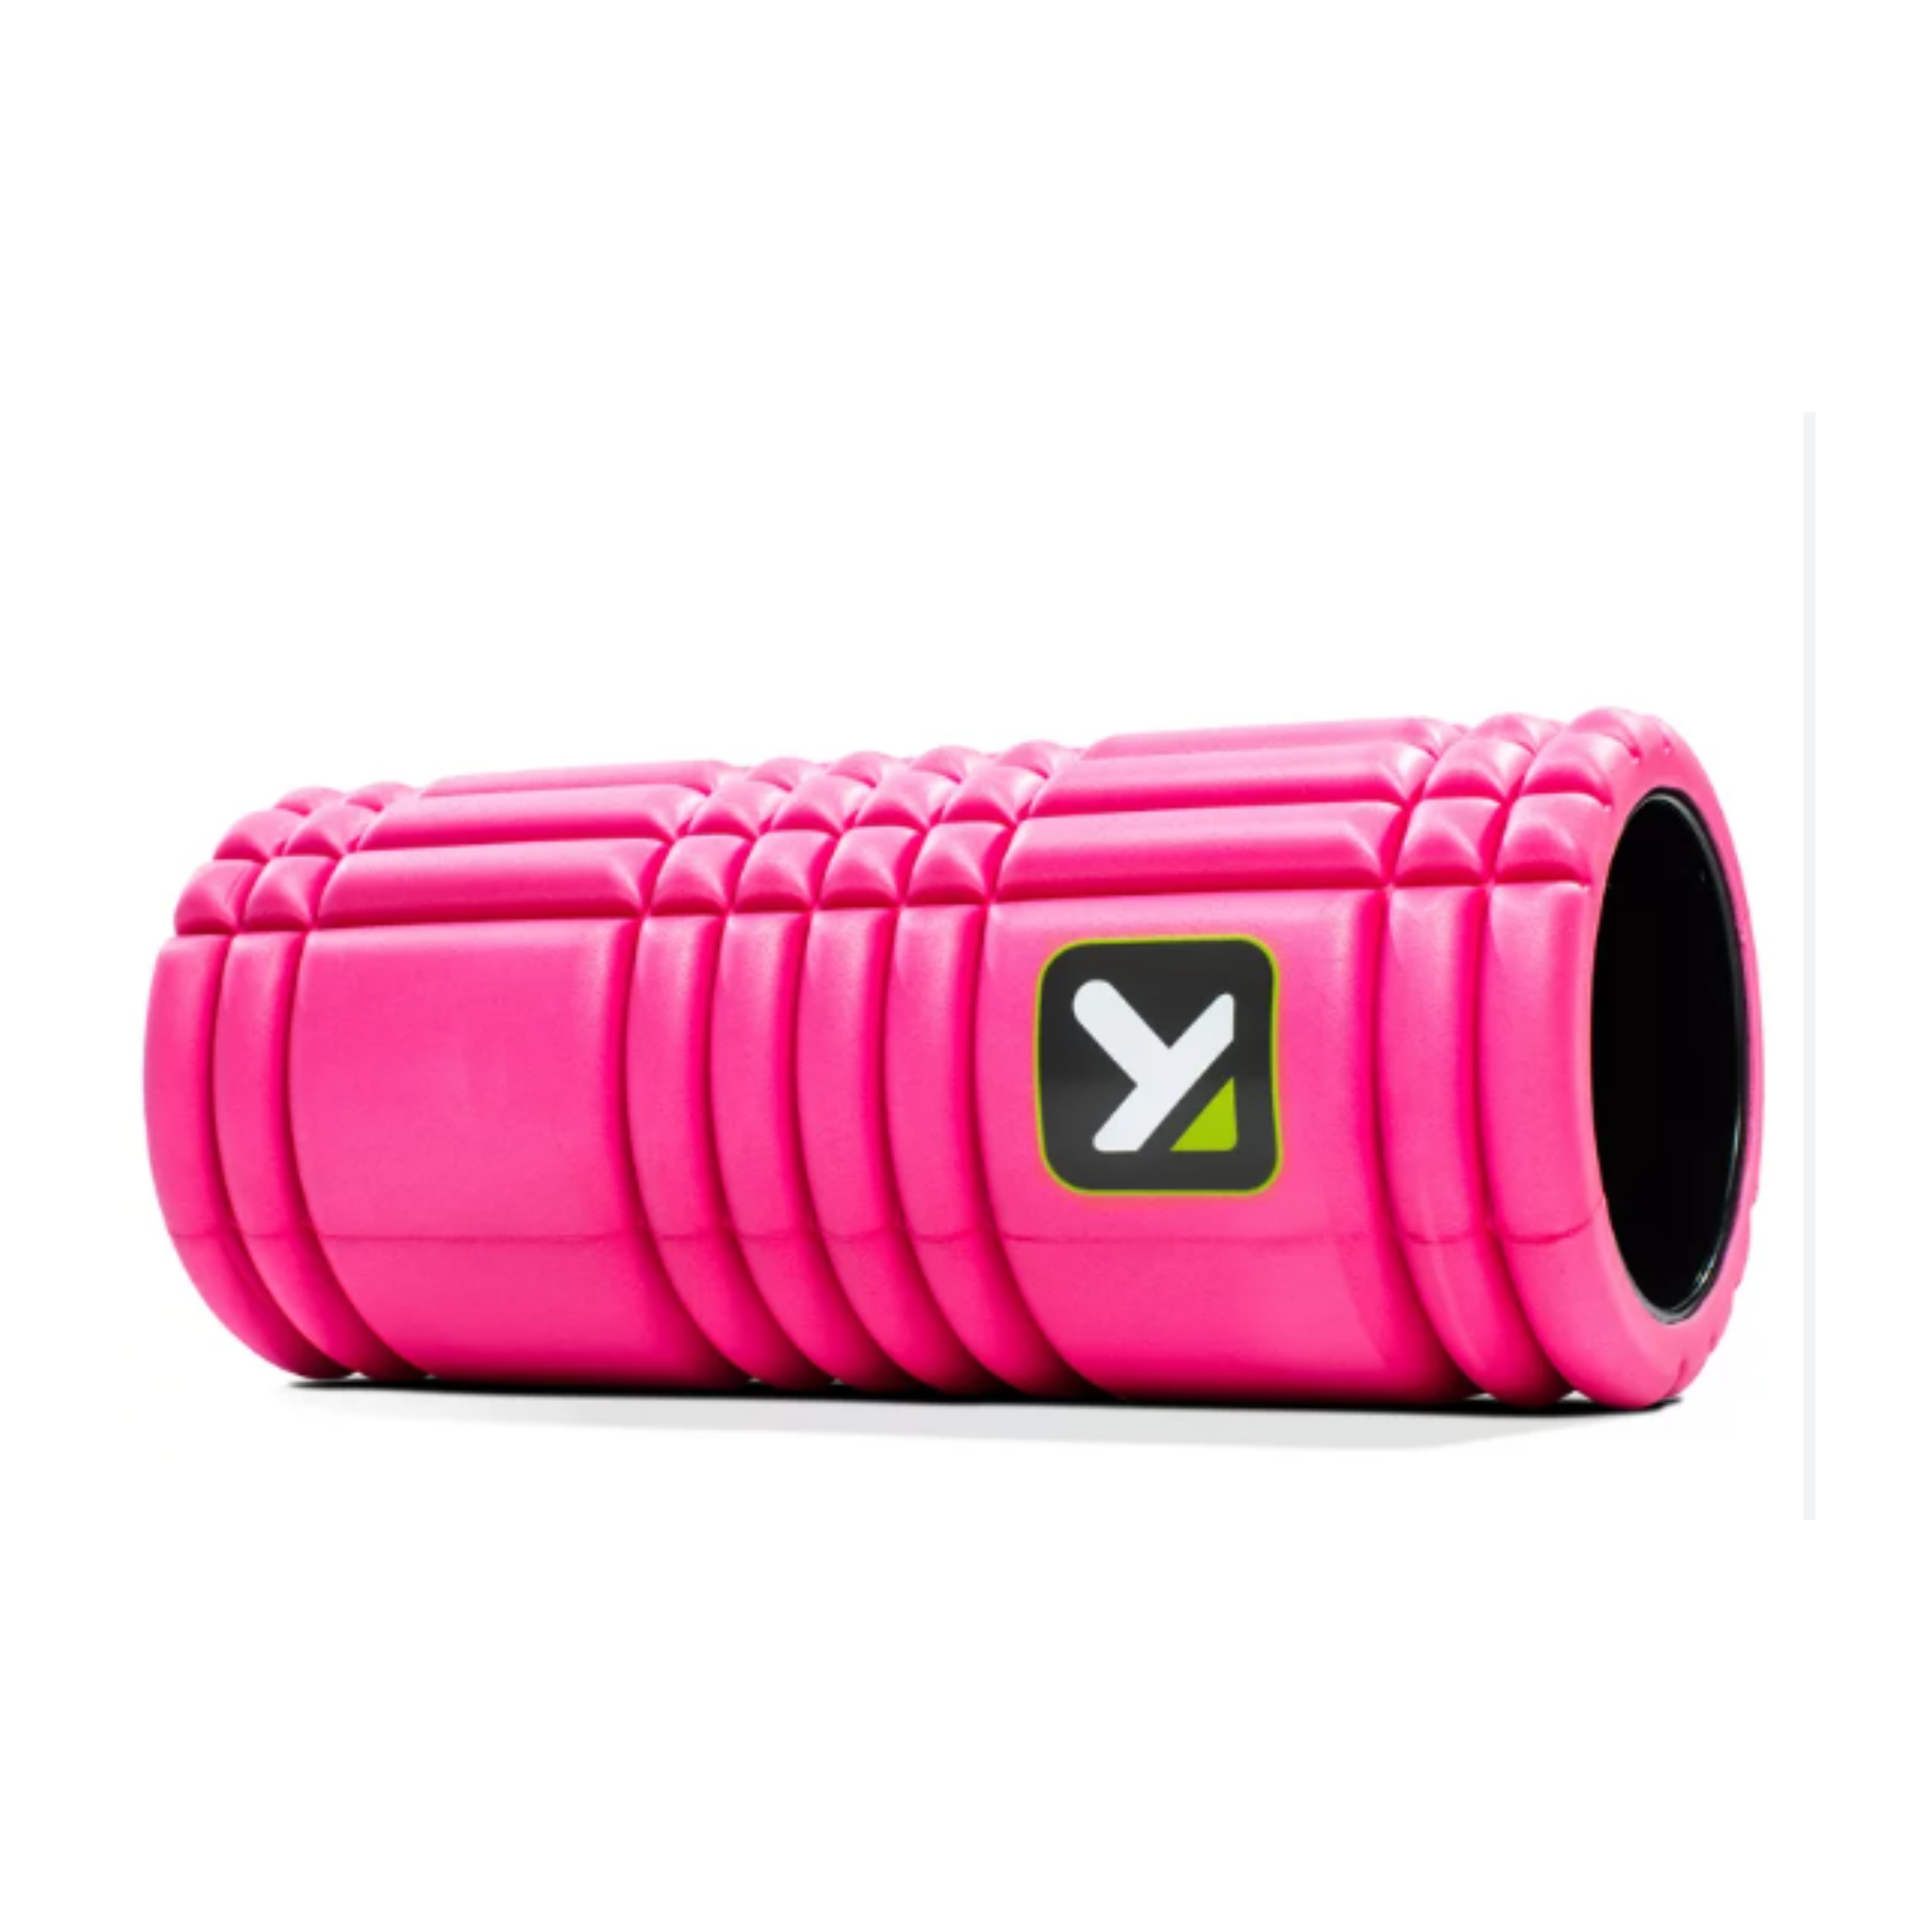 TRIGGER POINT TECHNOLOGIES THE GRID FOAM ROLLER PINK